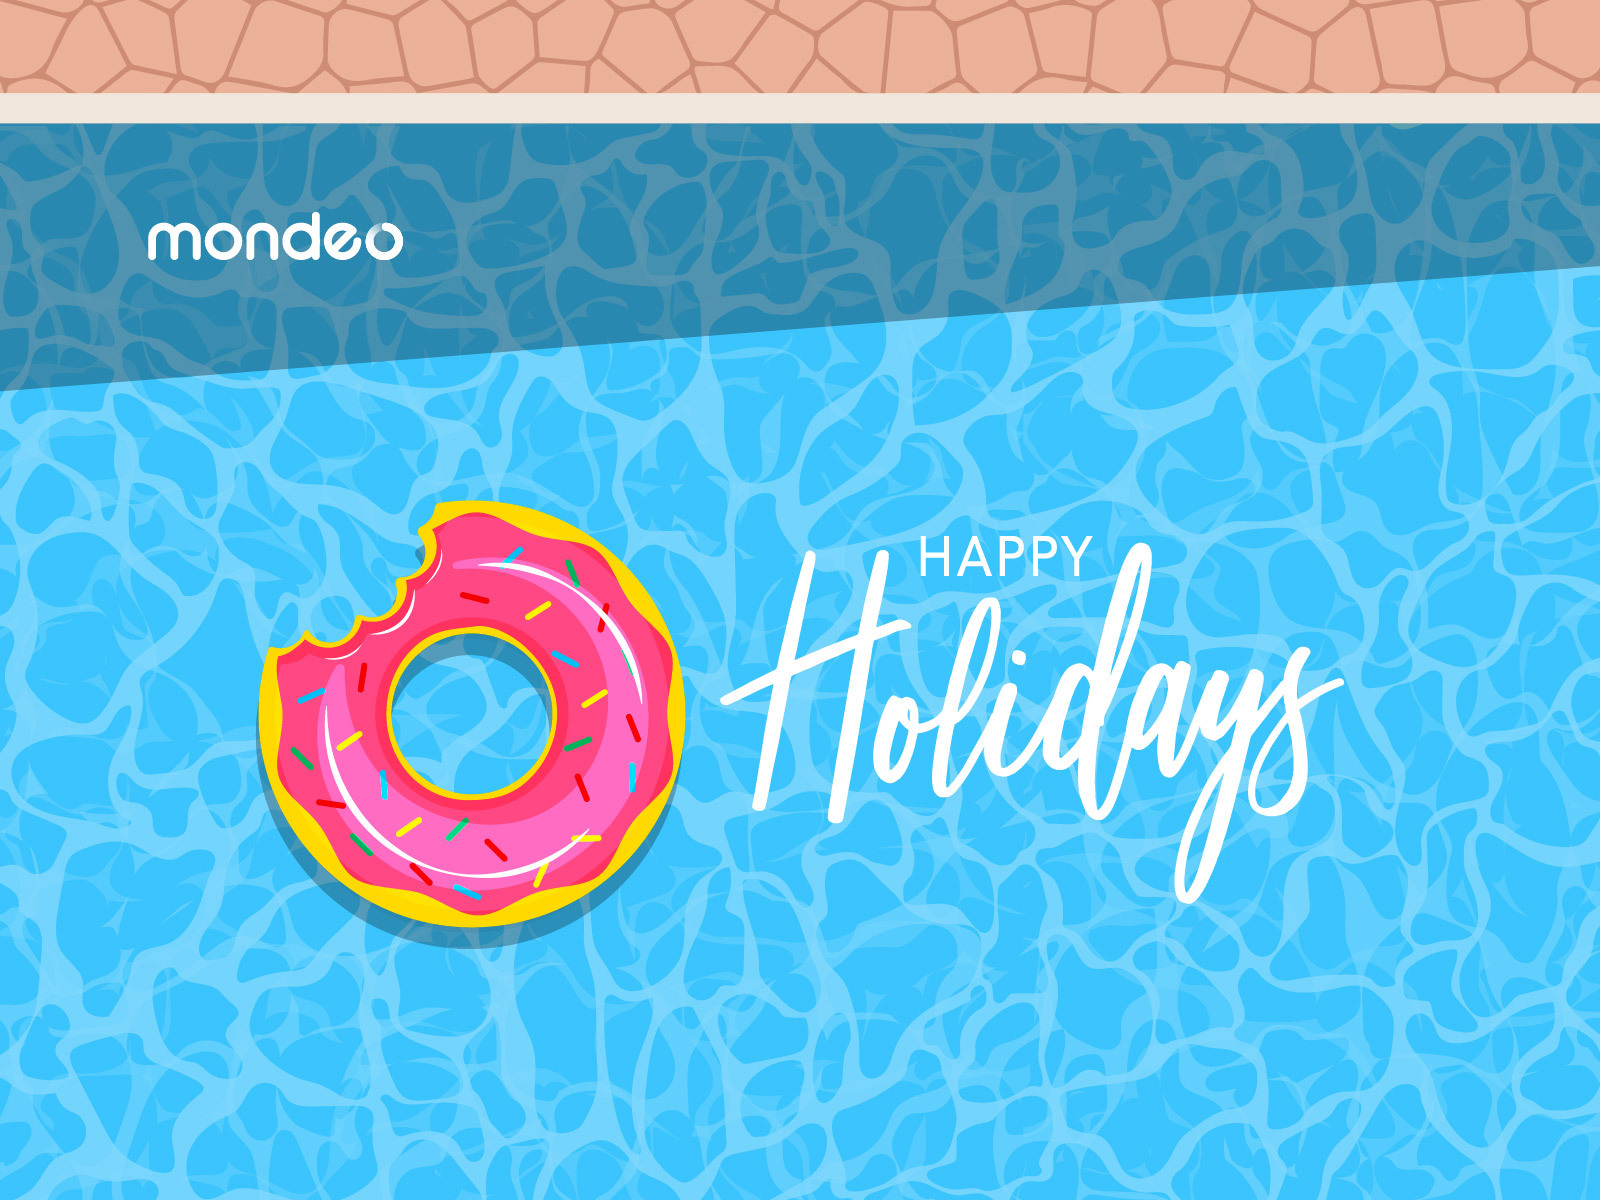 wishing-you-happy-holidays-by-mondeo-studio-on-dribbble